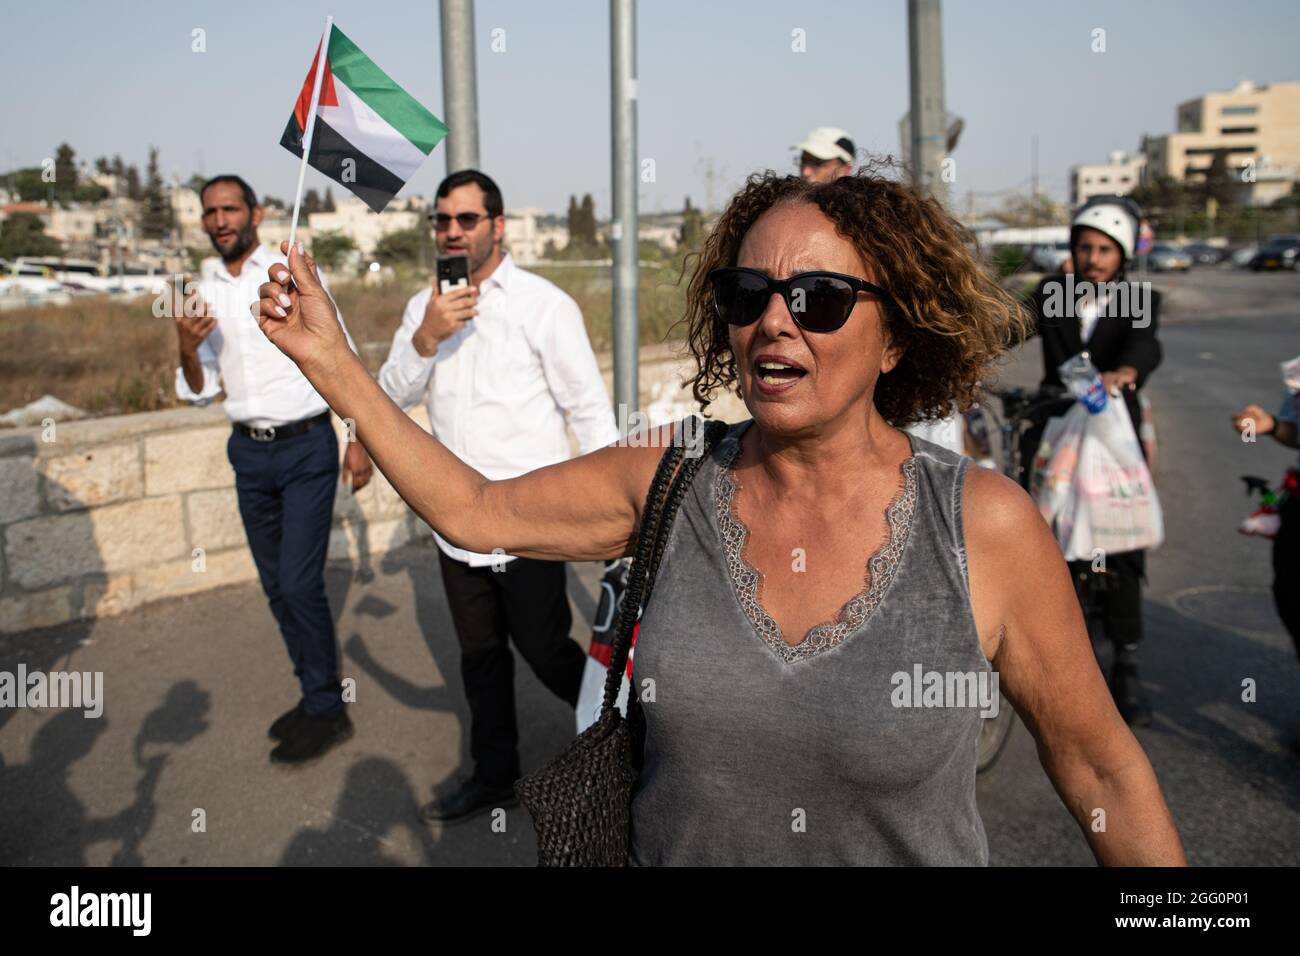 Jewish and Palestinian protestors in Sheikh Jarach during the weekly protest in front of the Israeli Police checkpoint at the entrance to the neigberhood - which is monitoring entrance of non-residents since last April. Sheikh Jarach. Jerusalem, Israel. 28th Aug 2021. (Photo by Matan Golan/Alamy Live News) Stock Photo